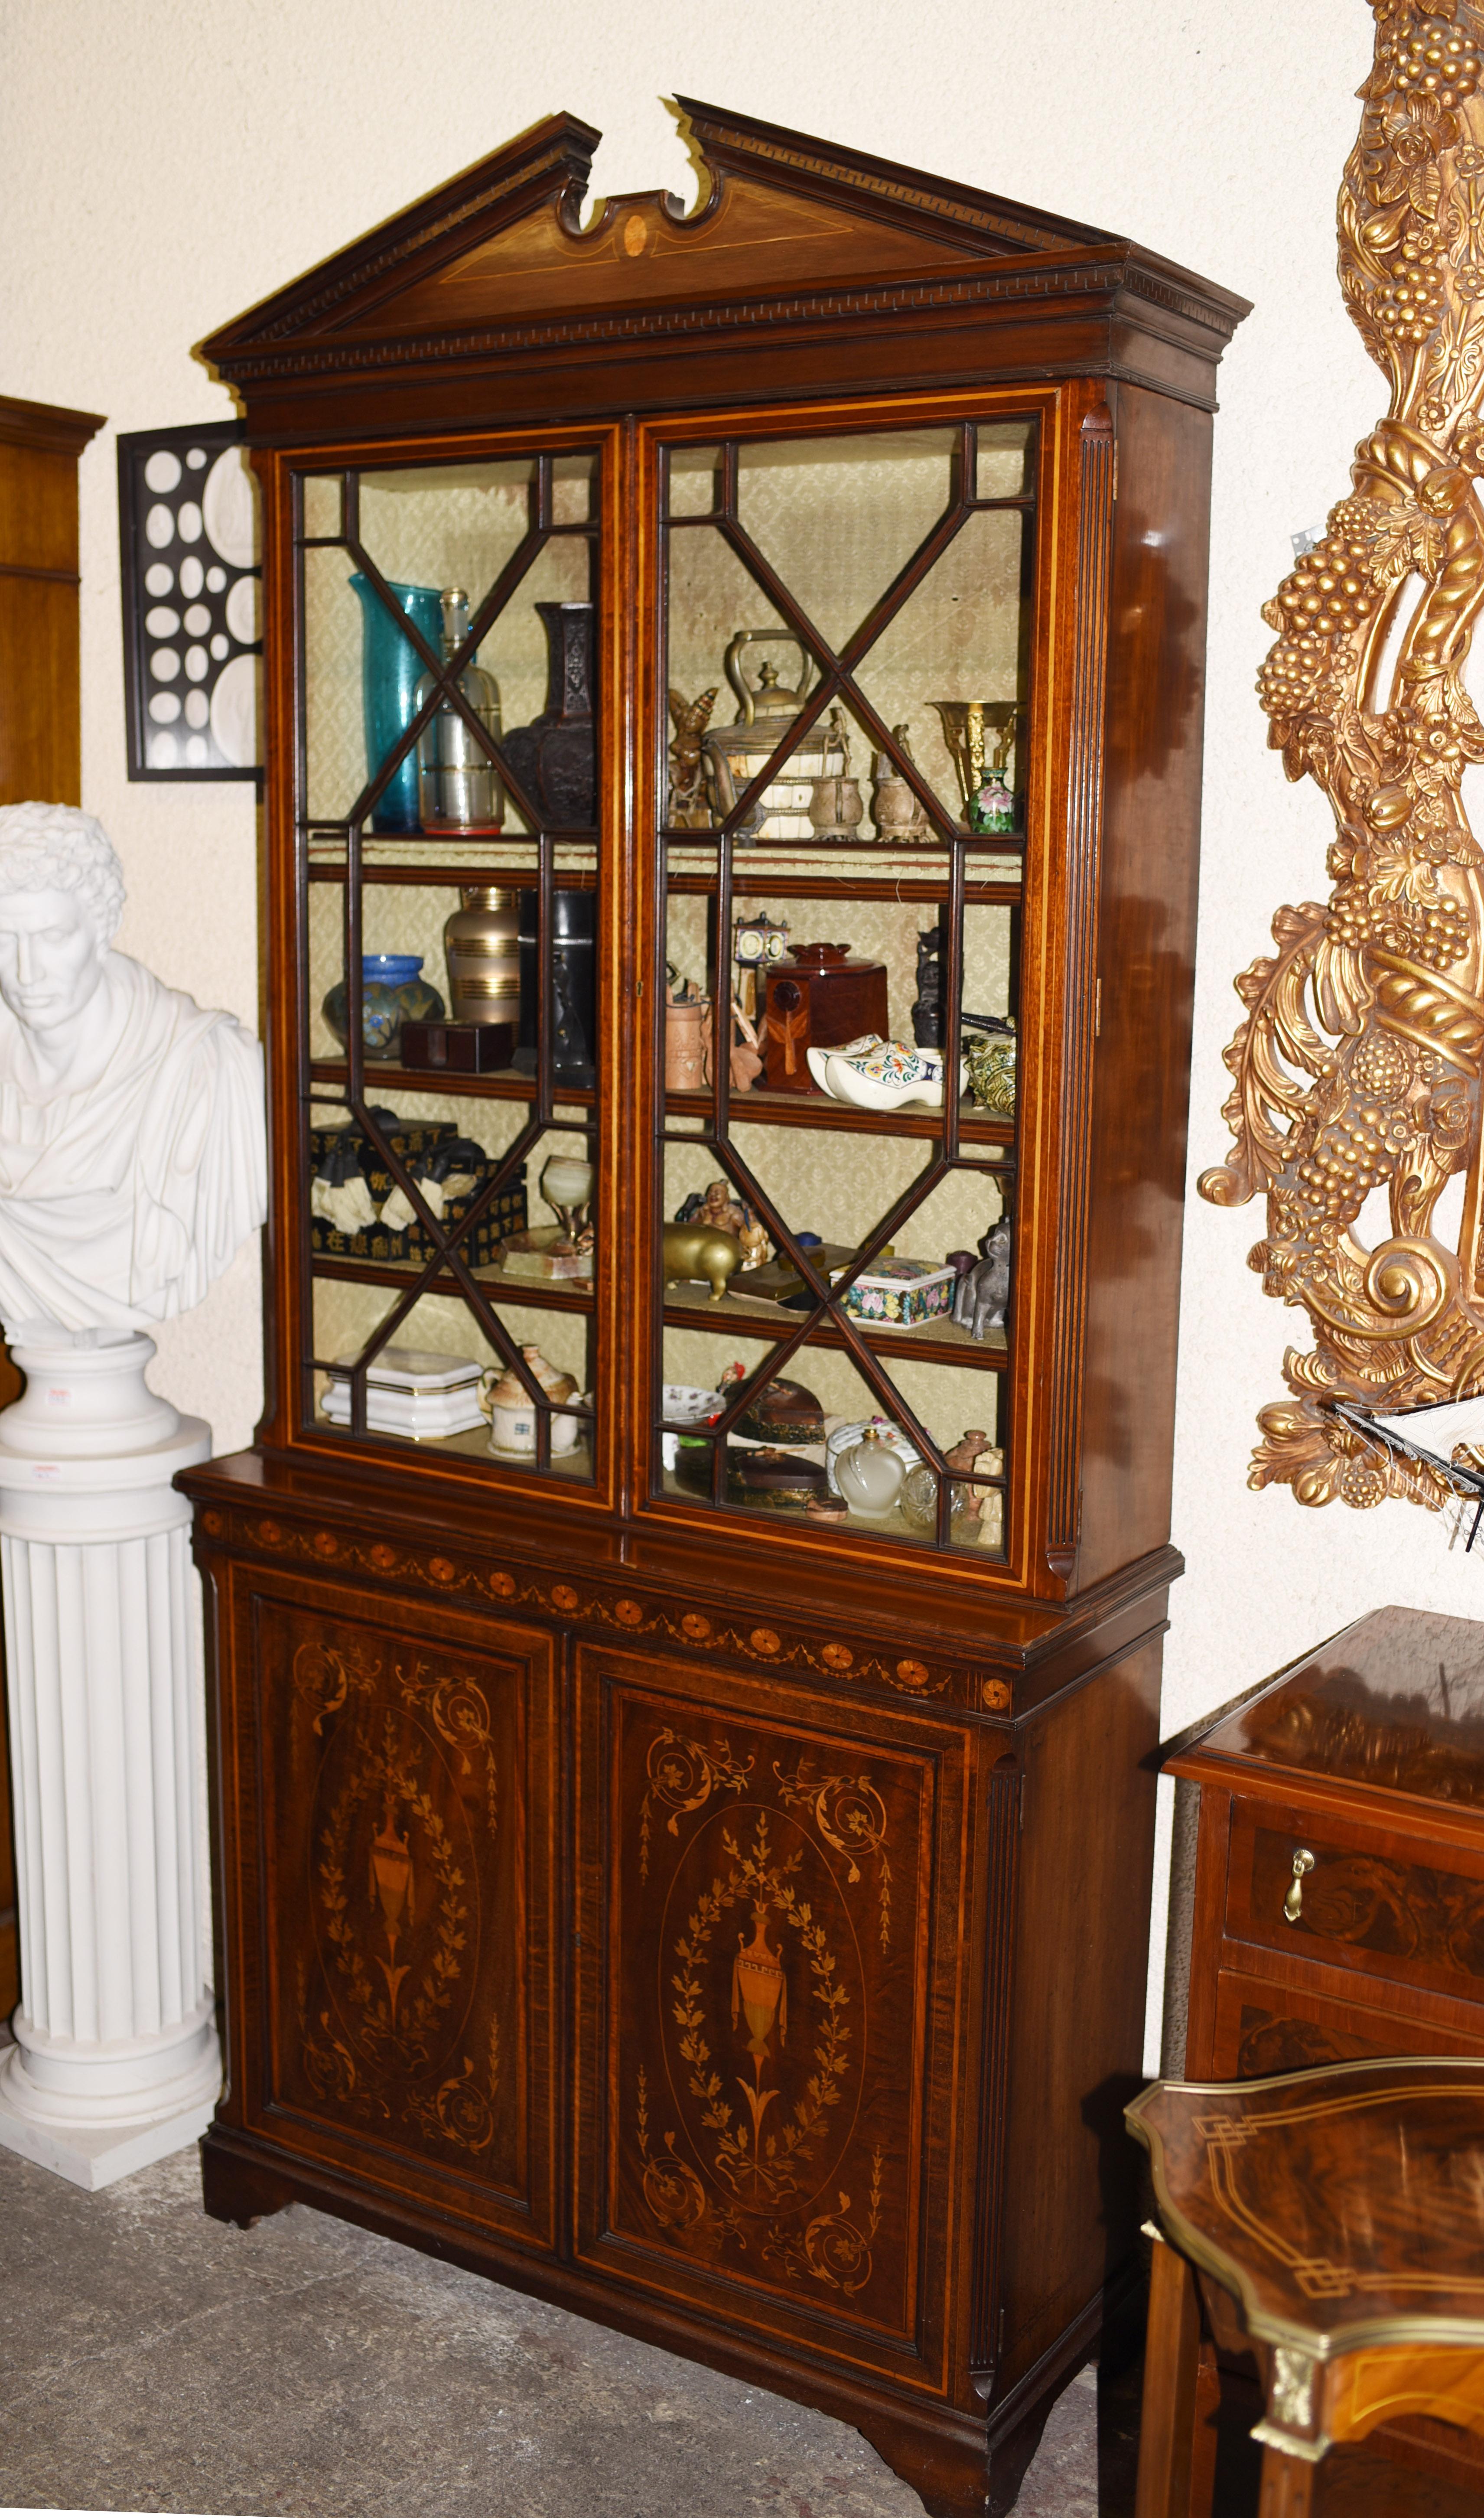 Gorgeous Sheraton revival mahogany bookcase
Classic broken arch pediment to the top
Intricate inlay work includes floral motifs and urn motifs
Offered in great shape ready for home use right away
We ship to every corner of the planet.
All our